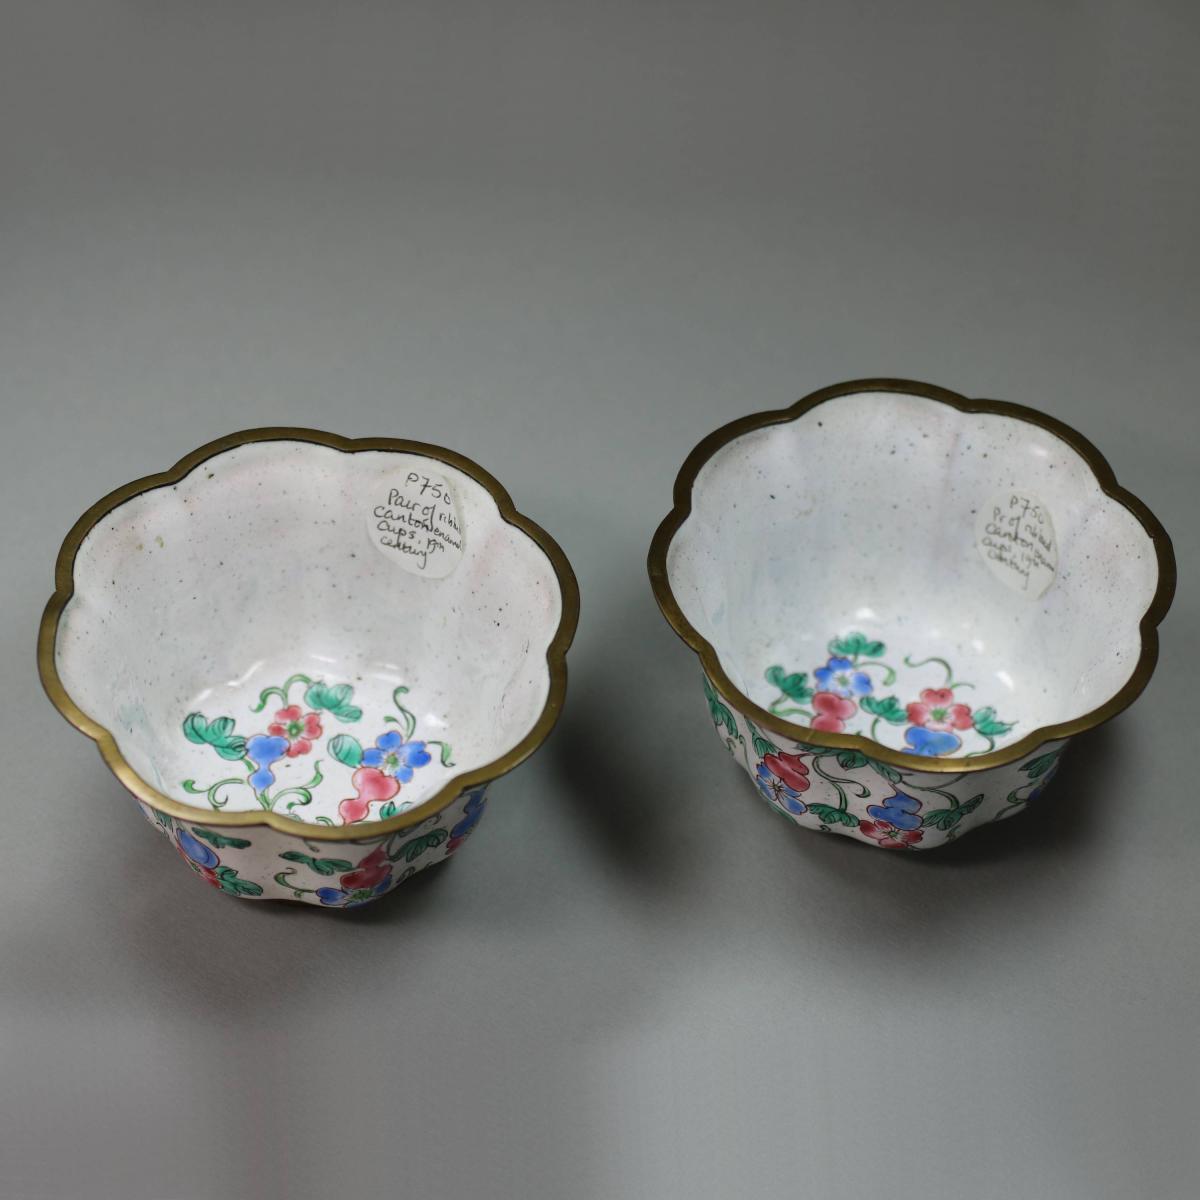 Interior and rims of canton enamel cups